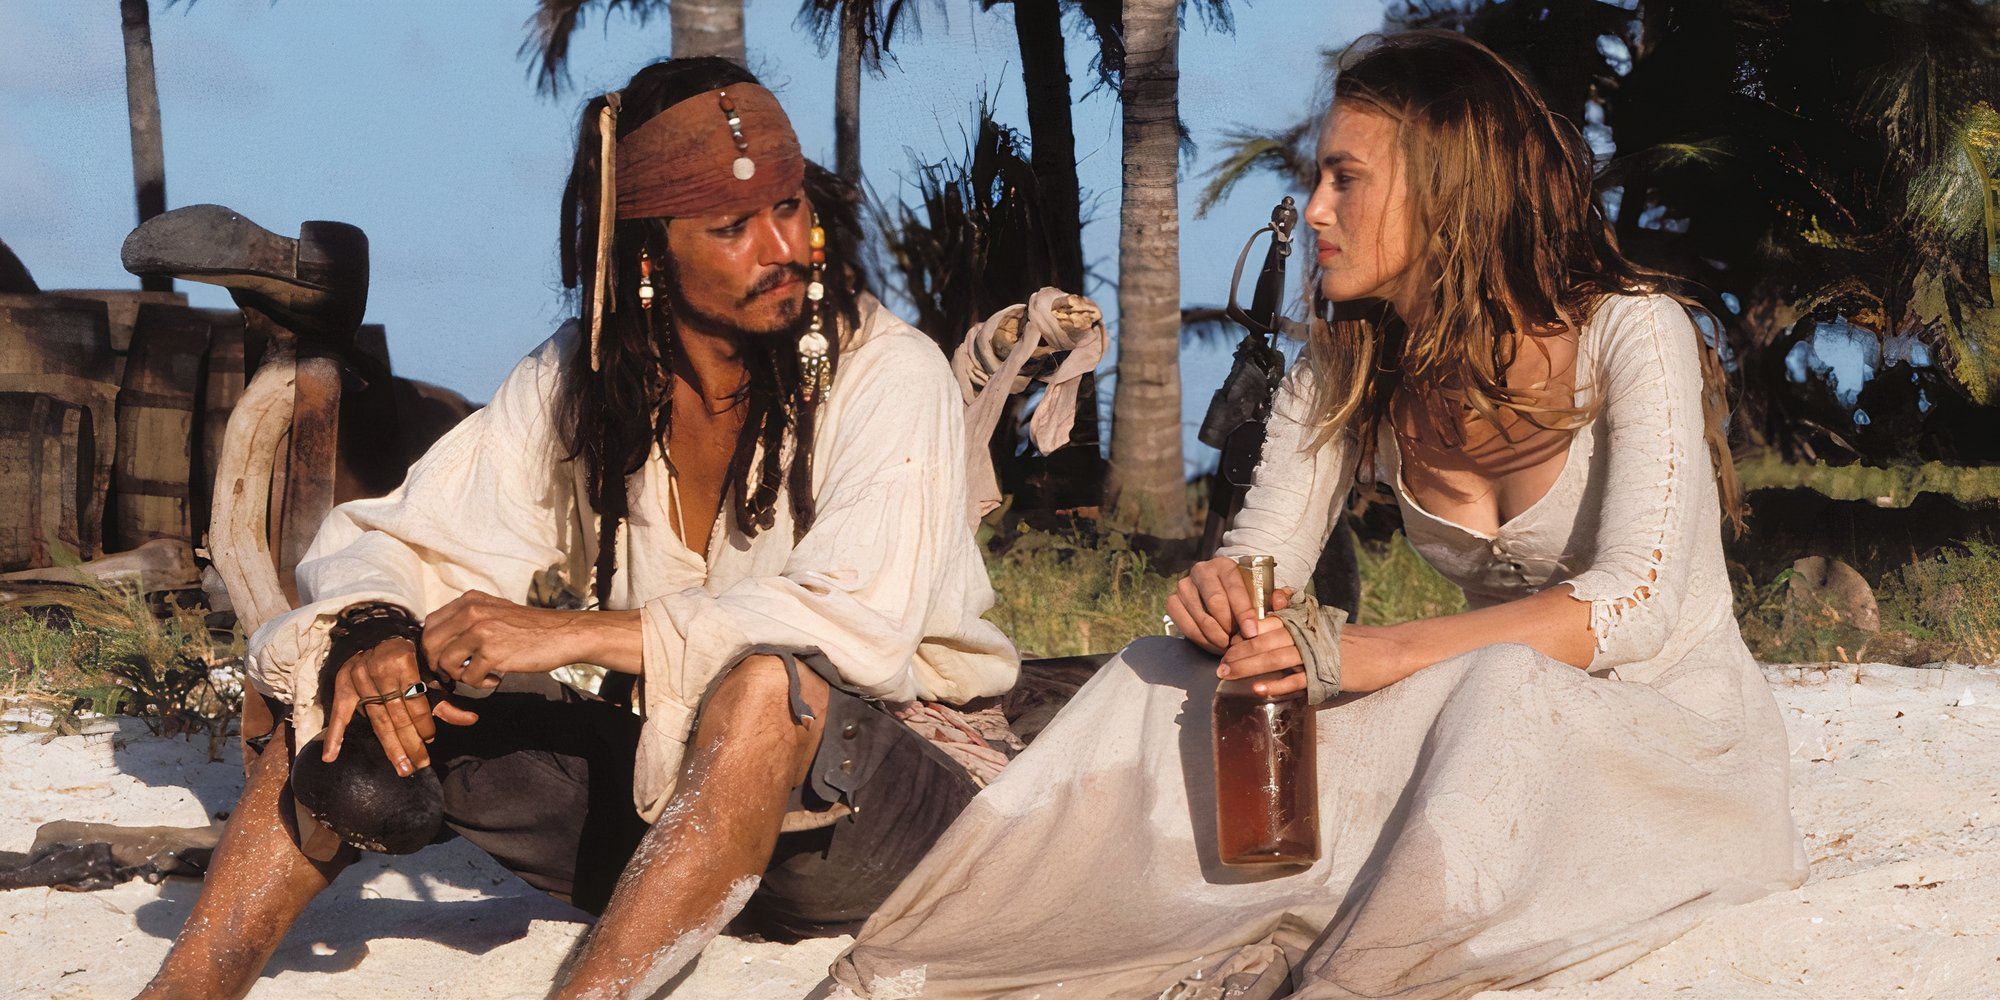 Jack Sparrow looking at Elizabeth Swann in Pirates of the Caribbean The Curse of the Black Pearl